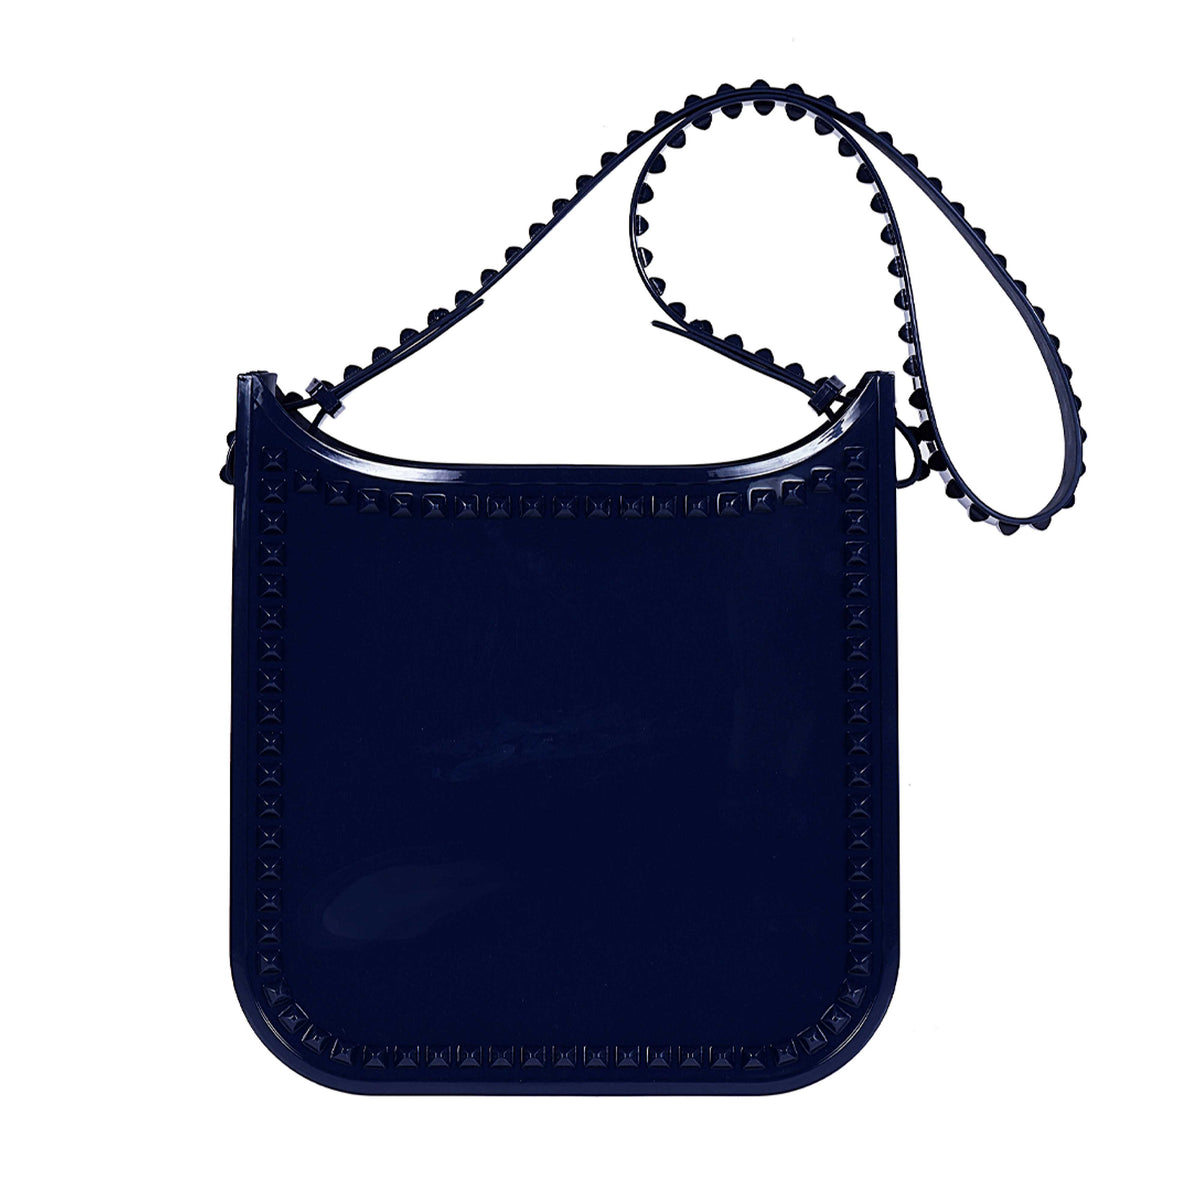 Navy blue rubber beach bag with studded design from Carmen Sol